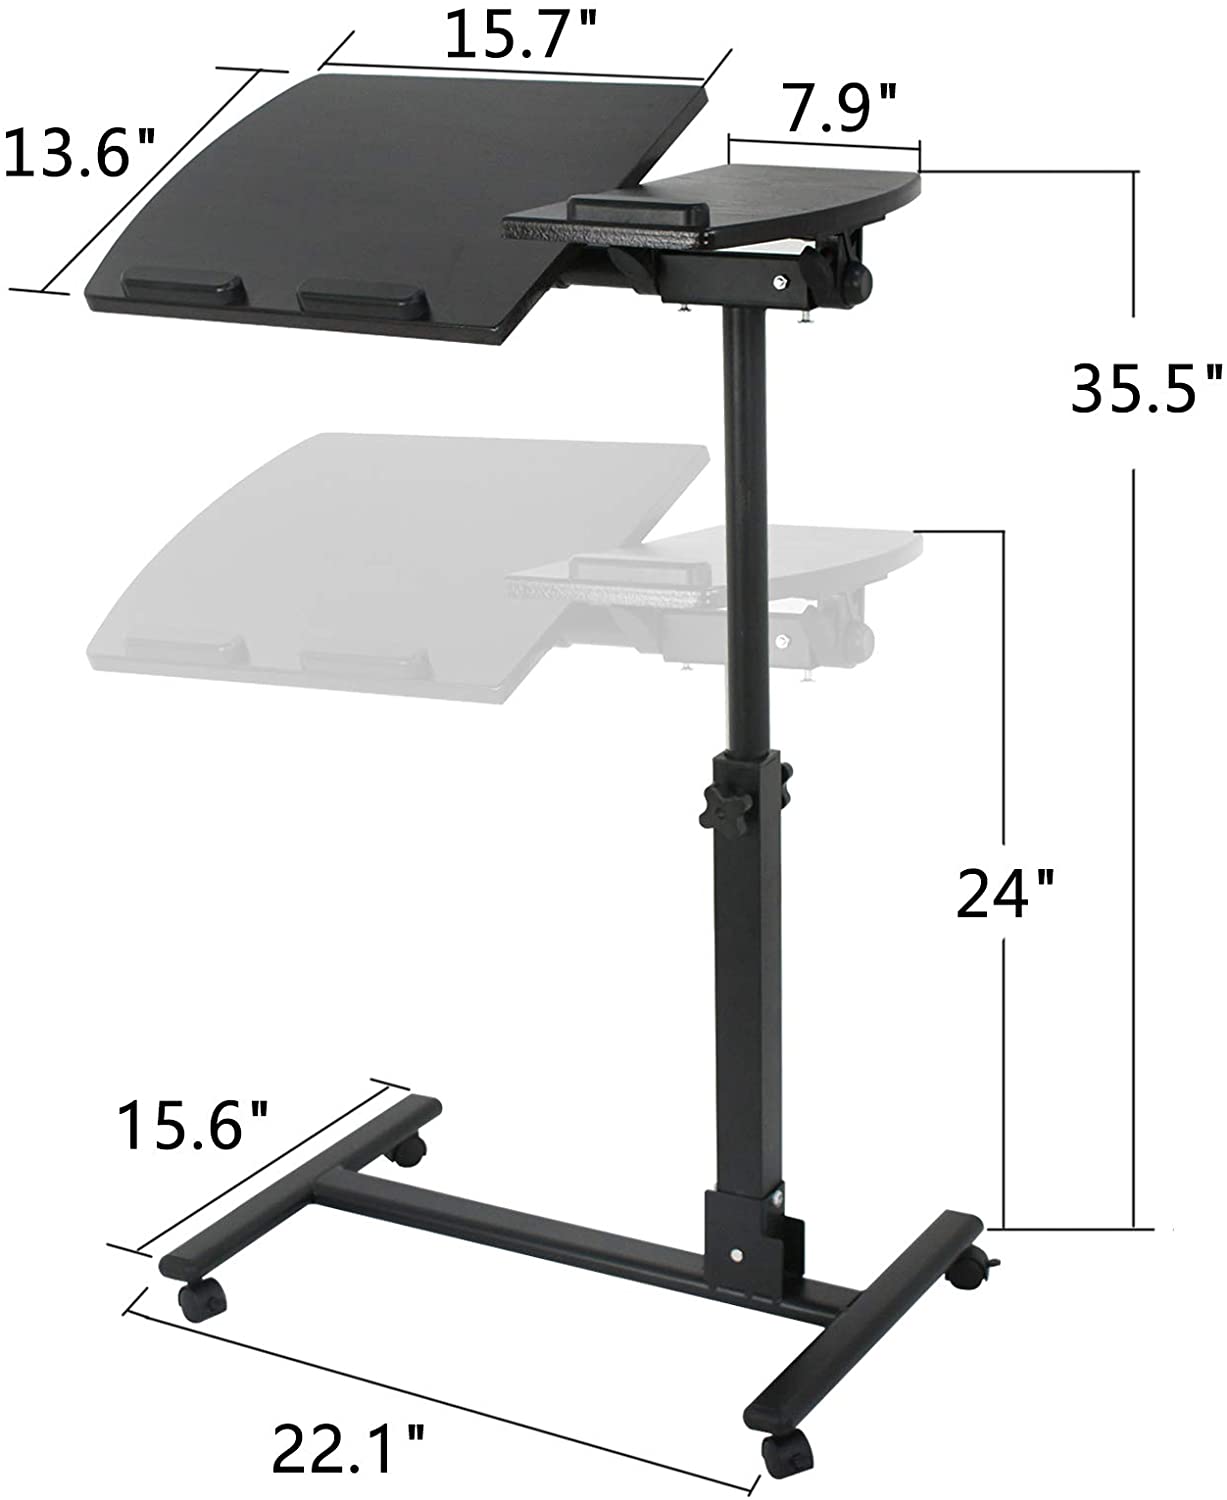 A cart for a laptop. The base of the rolling cart is 15.6" by 22.1". The shortest height for the cart is 24" and extends up to 35.5". The top of the cart has to separate tables. One measures 13.6" wide by 7.9" long. The other is 13.6" wide by 15.7" long